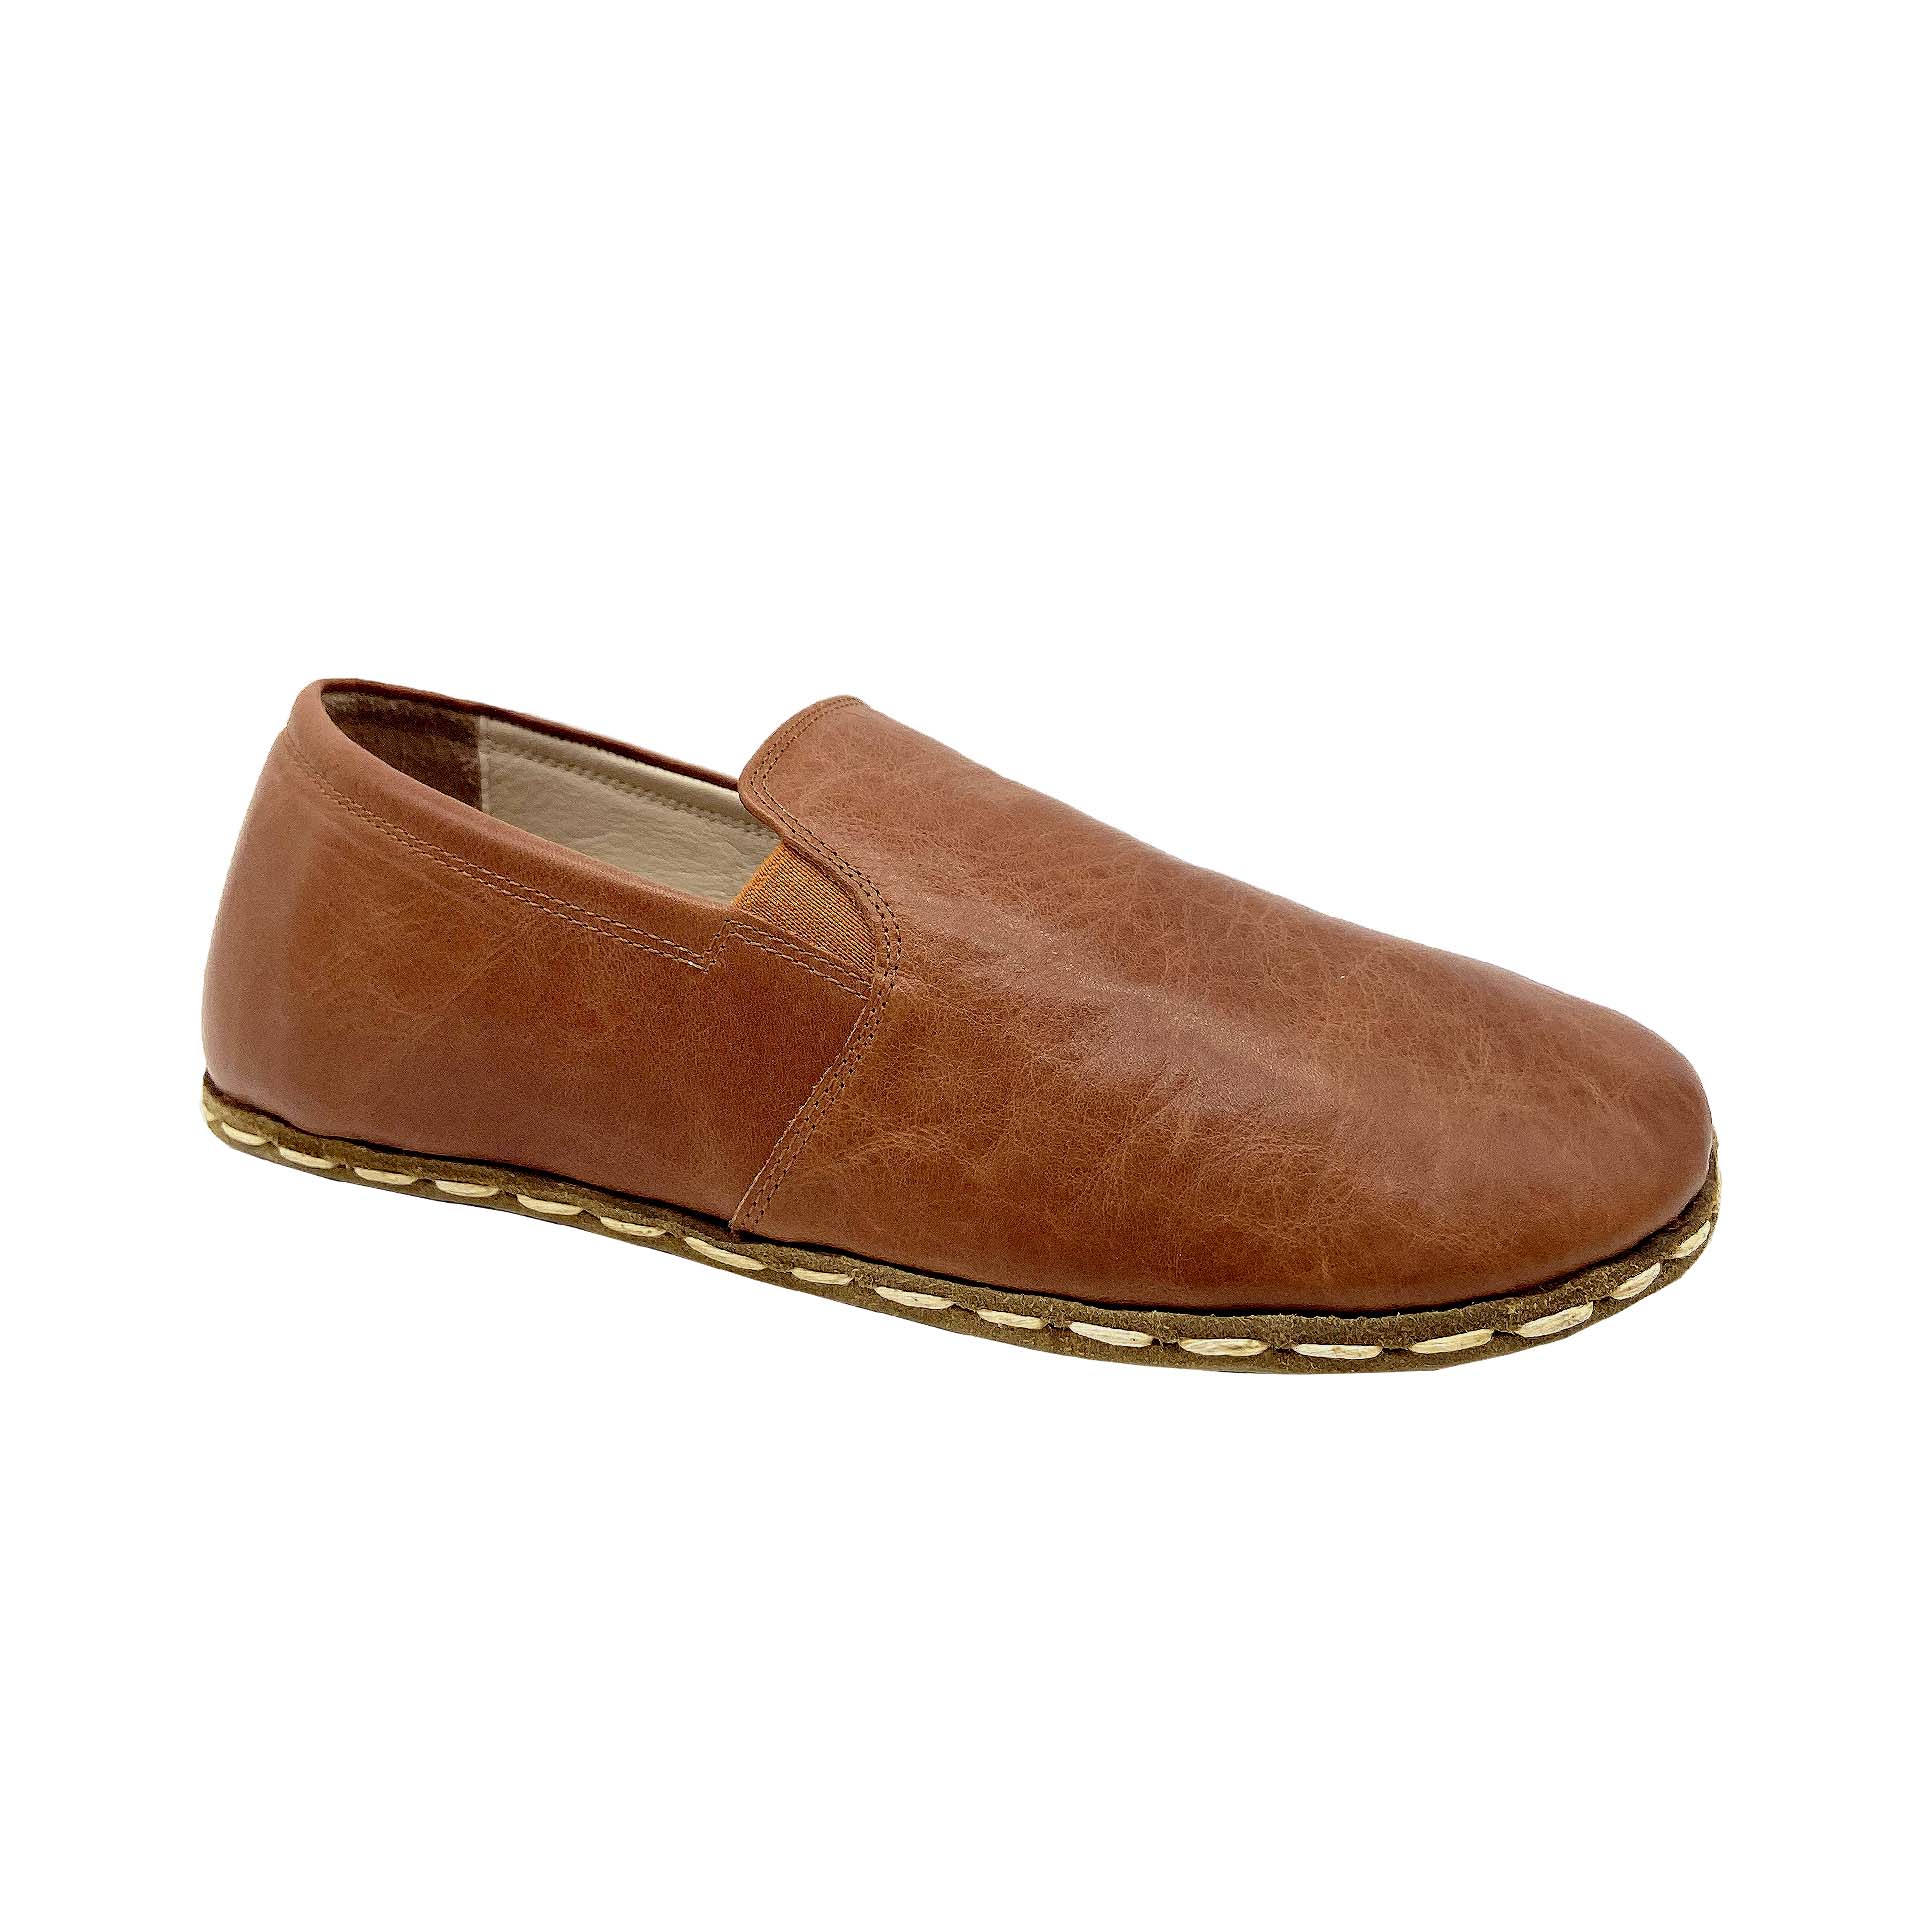 Men's Wide Final Clearance BAREFOOT Earthing Shoes